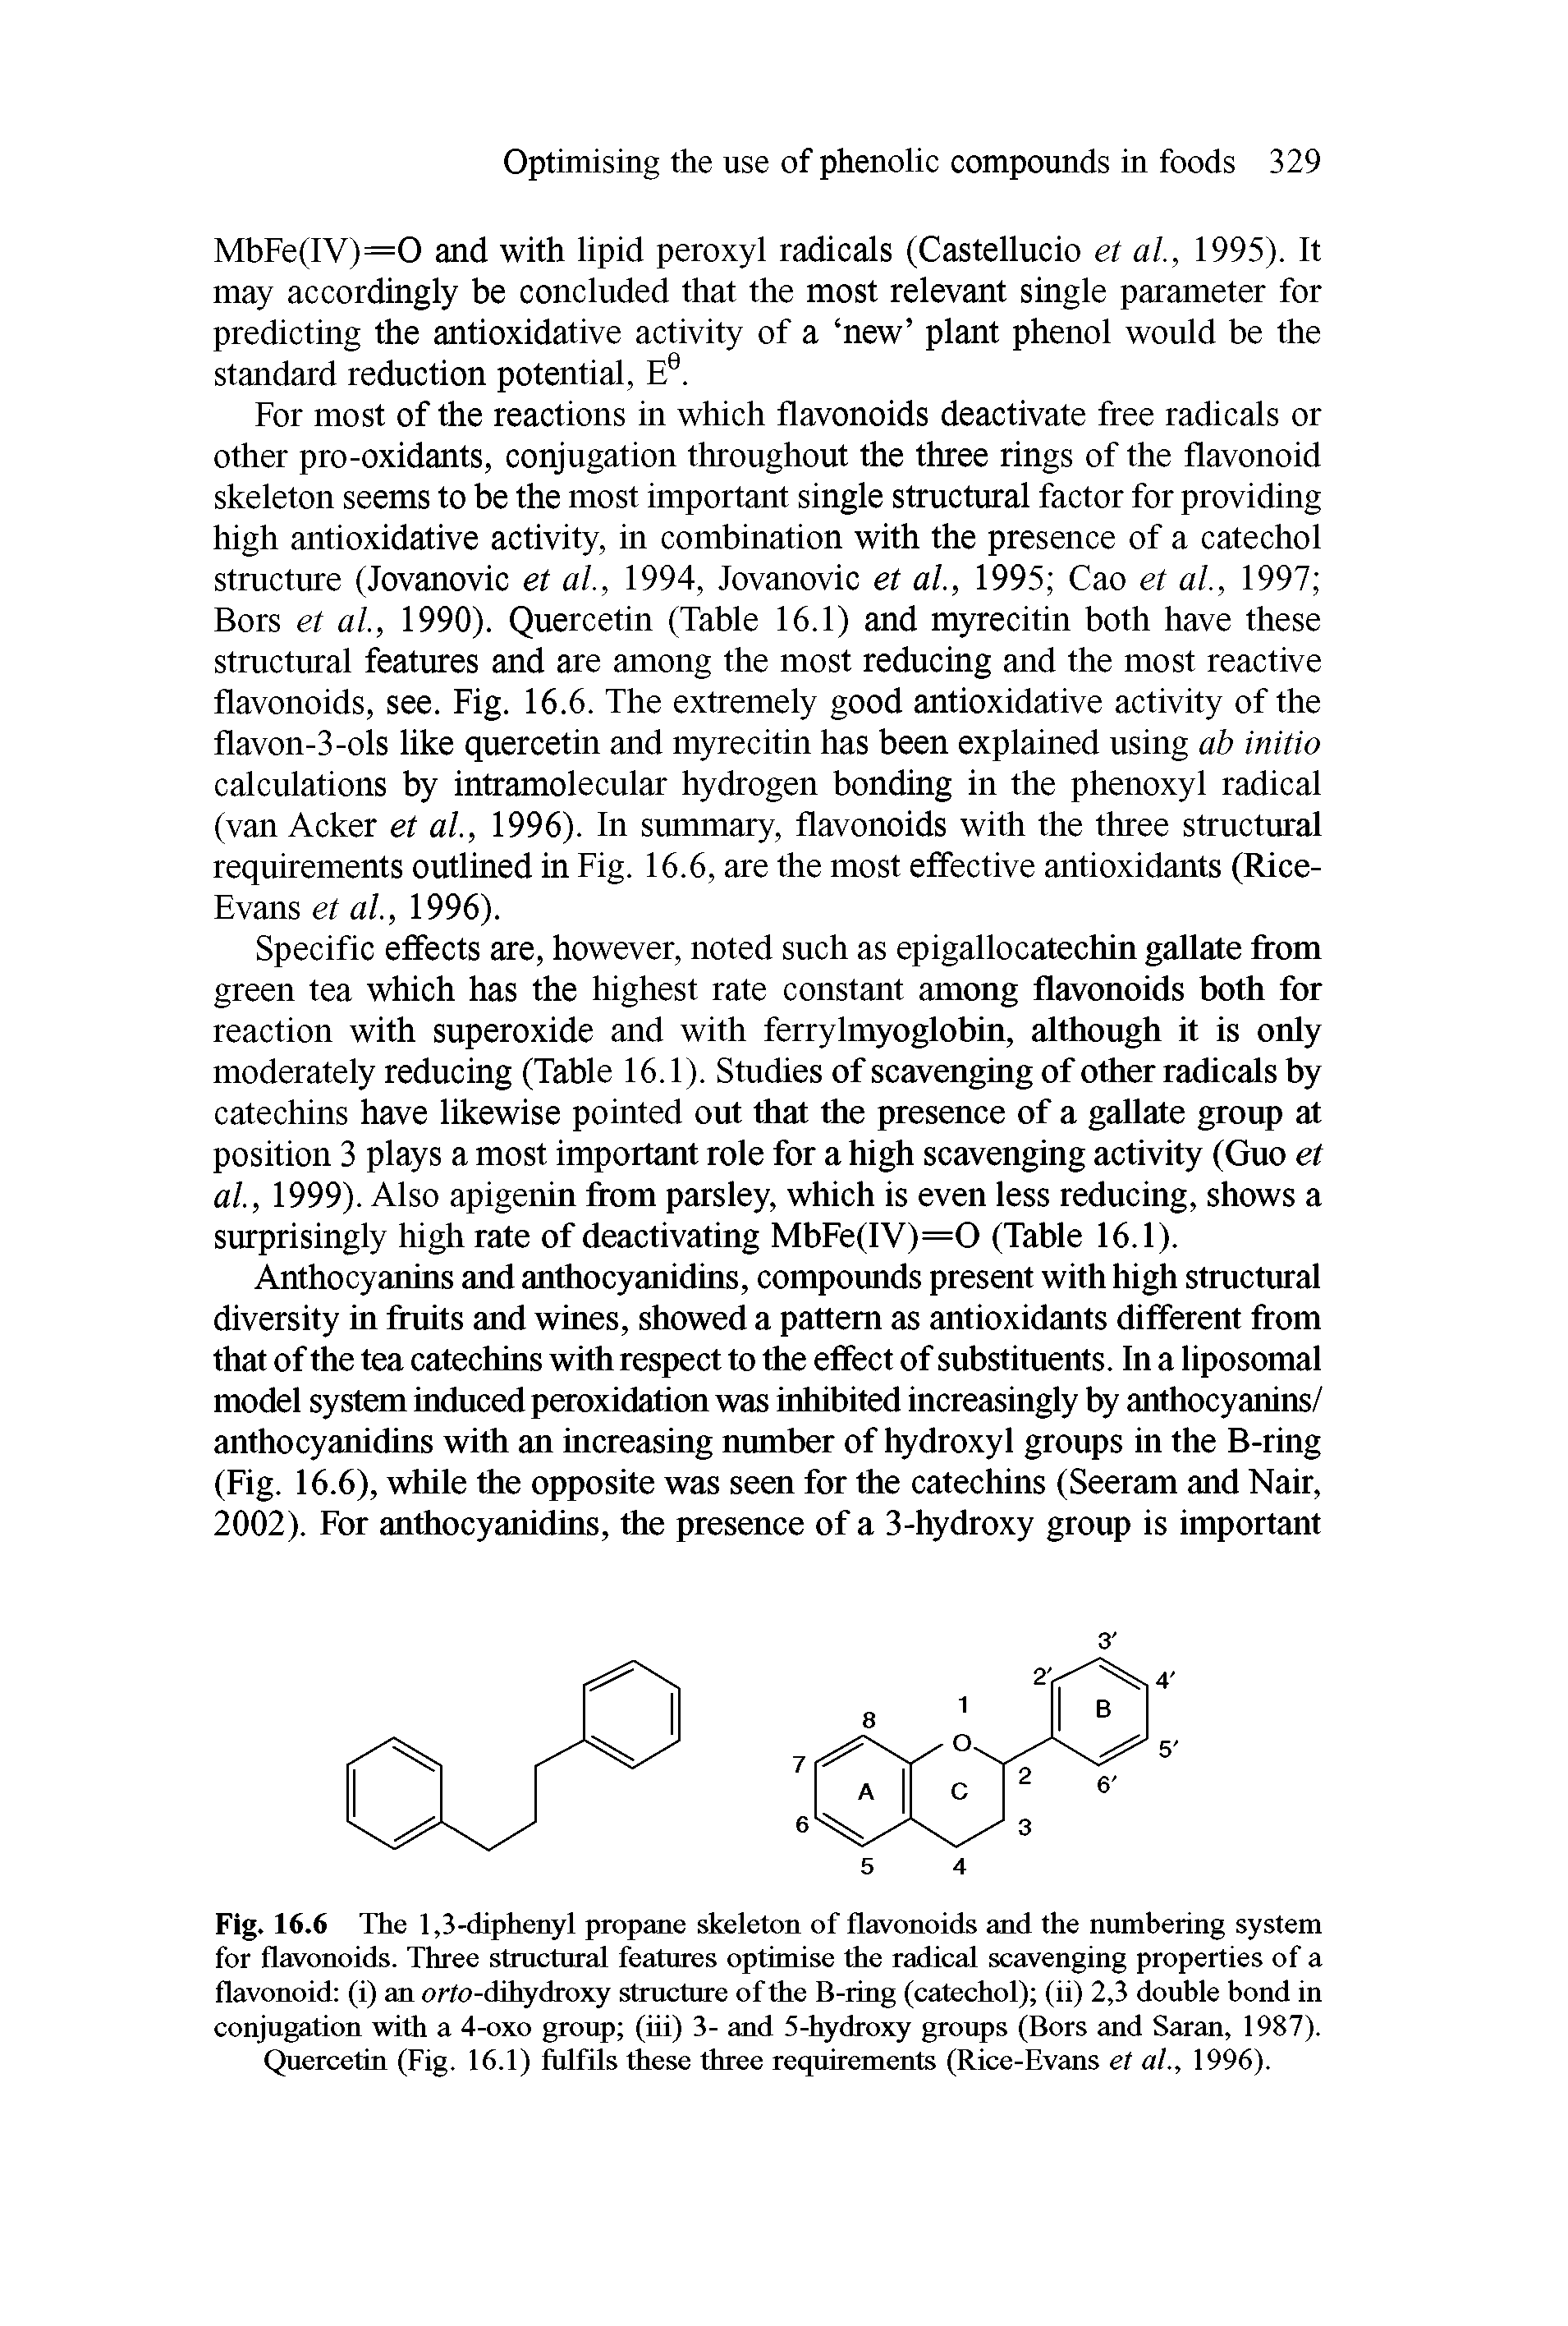 Fig. 16.6 The 1,3-diphenyl propane skeleton of flavonoids and the numbering system for flavonoids. Three structural features optimise the radical scavenging properties of a flavonoid (i) an orto-dihydroxy structure of the B-ring (catechol) (ii) 2,3 double bond in conjugation with a 4-oxo group (iii) 3- and 5-hydroxy groups (Bors and Saran, 1987).